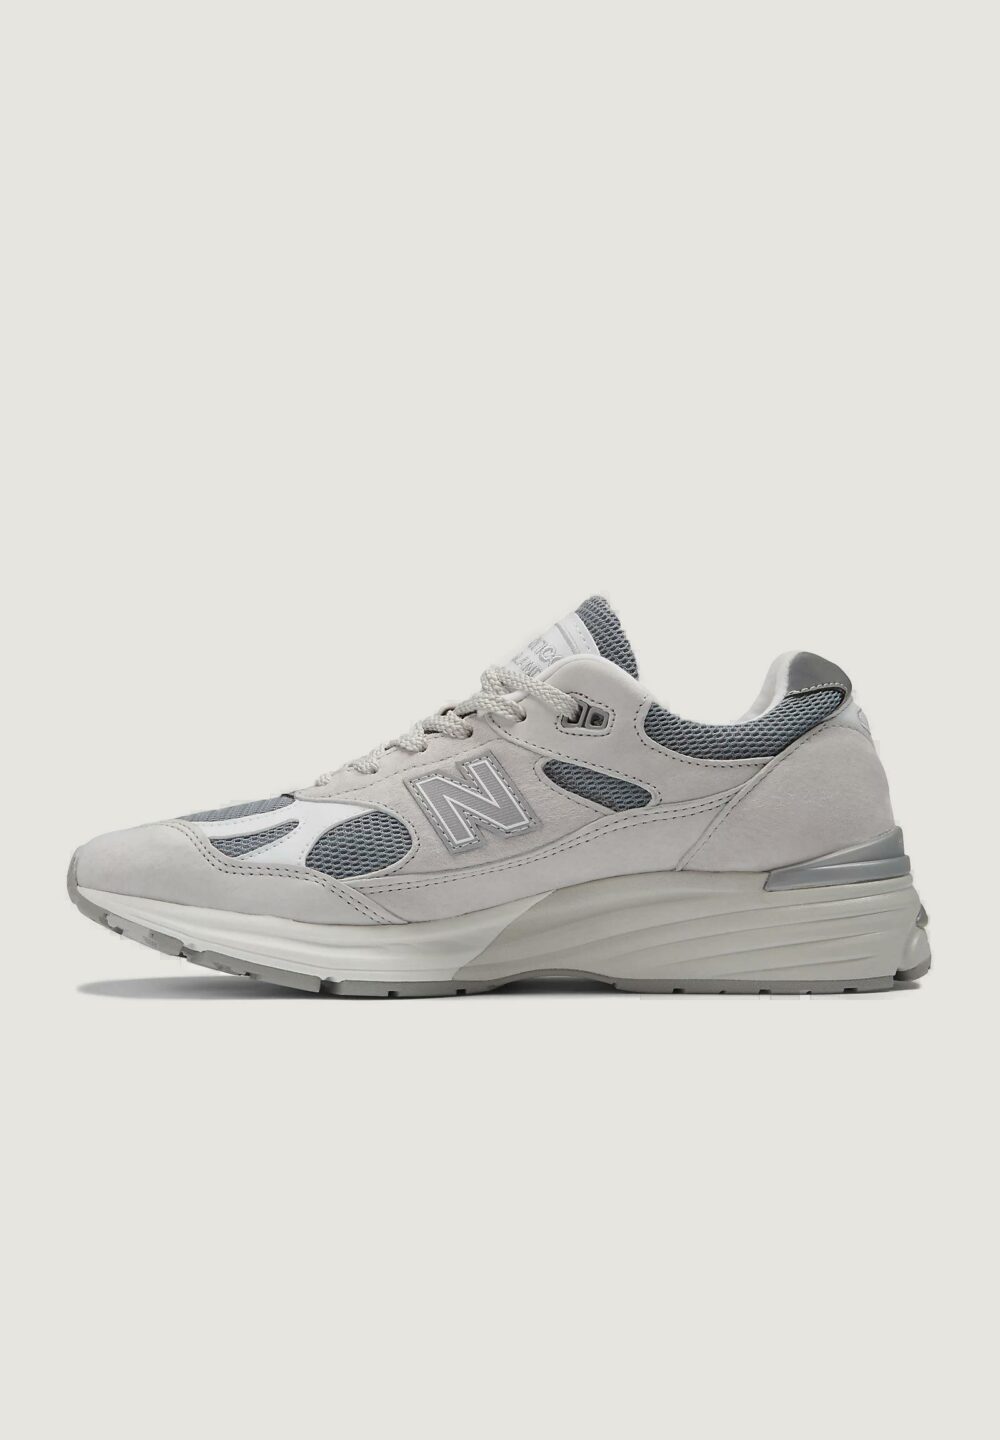 Sneakers New Balance MADE in UK 991v2 Grigio - Foto 2